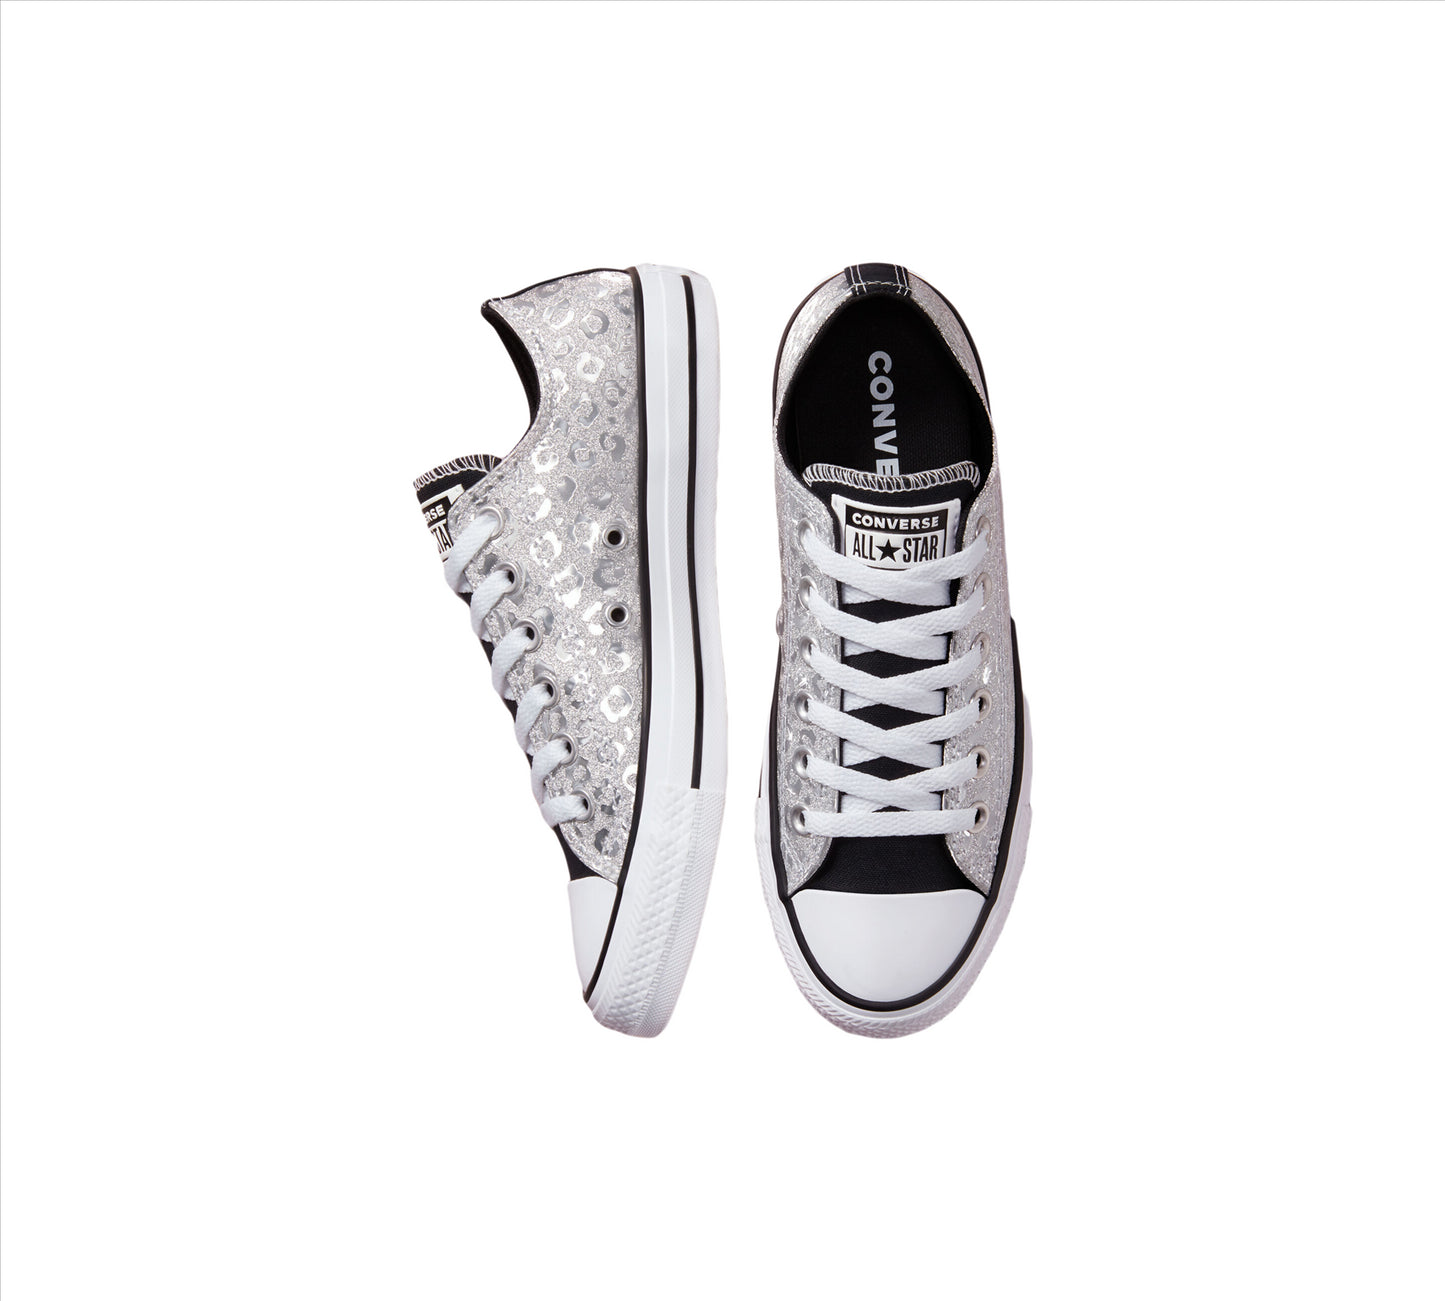 Converse Authentic Glam Chuck Taylor All Star 572042C Shoes Silver/White UK 3-8